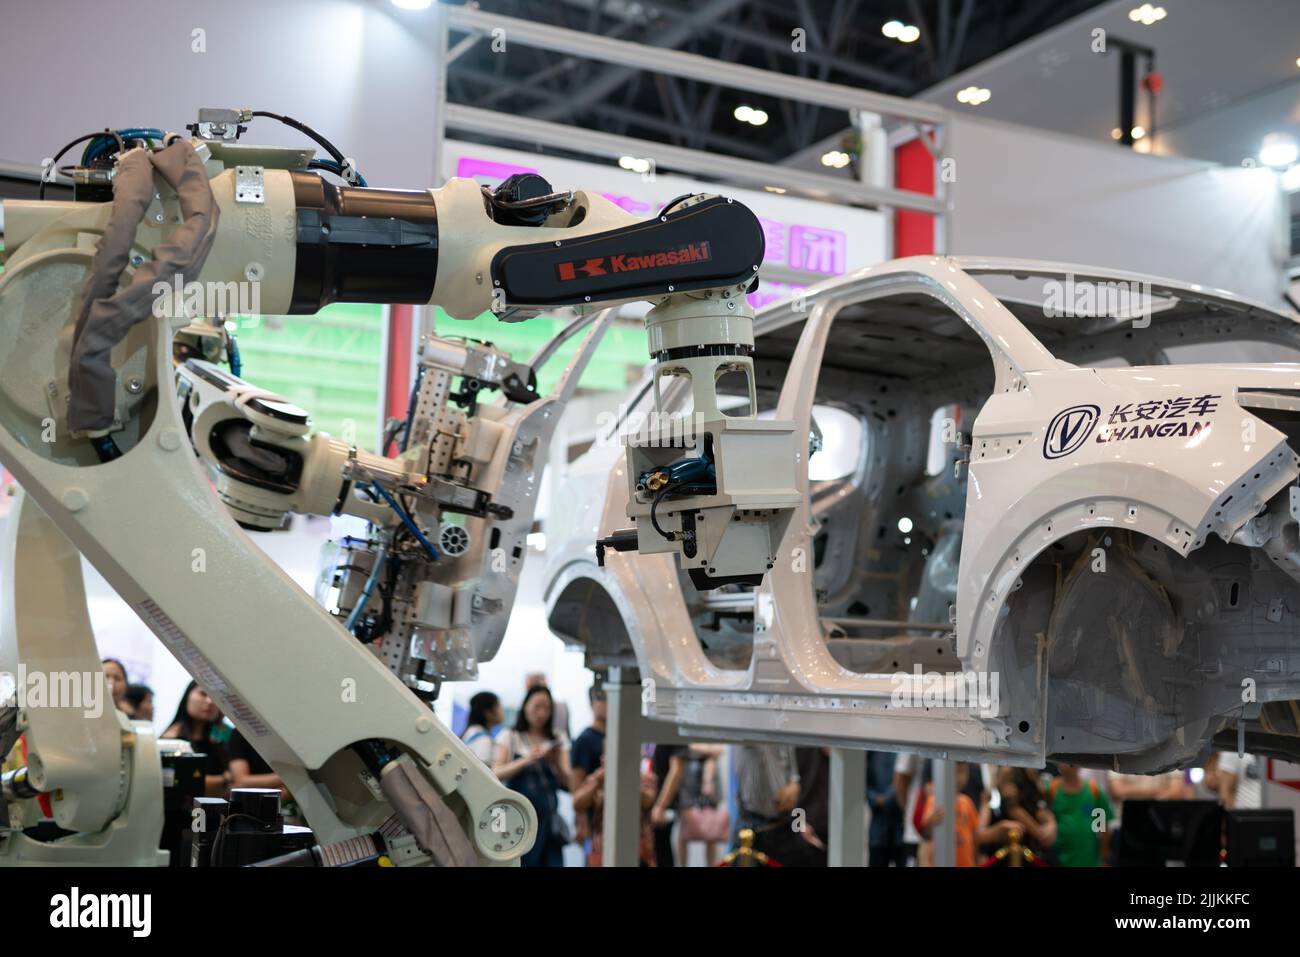 A Robot arm display working on a car in the Smart China Expo in Chongqing, China Stock Photo